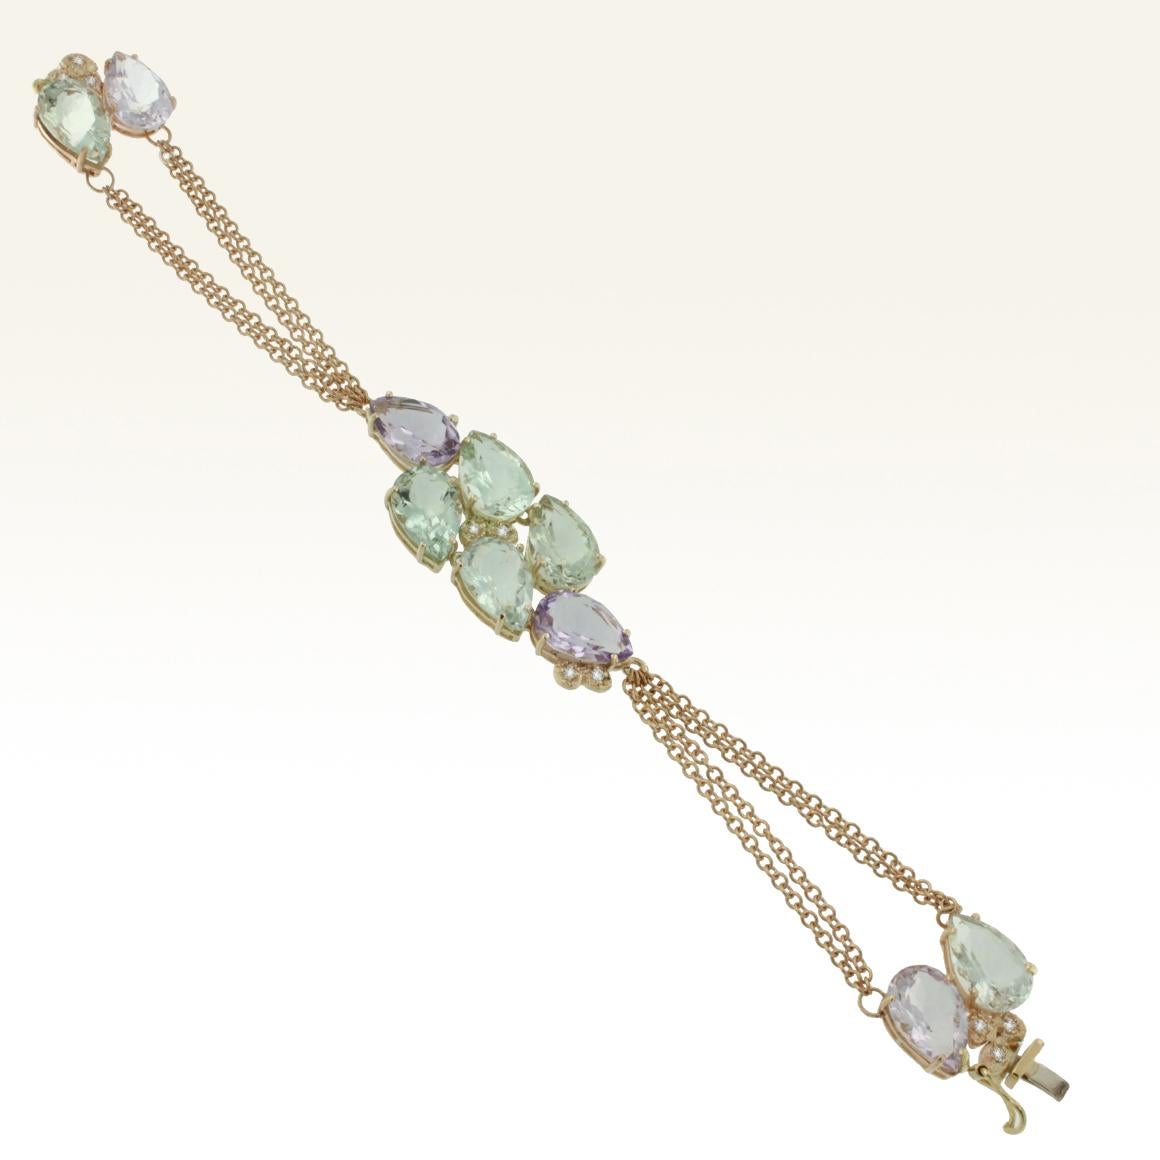 Truly elegant bracelet, unique piece by Stanoppi Jewellery since 1948 made in Italy. The soft and bright color of the stones creates a pleasant feeling of elegance. It’s hard to resist it!
Exclusive piece designed by Gisella , owner of the company